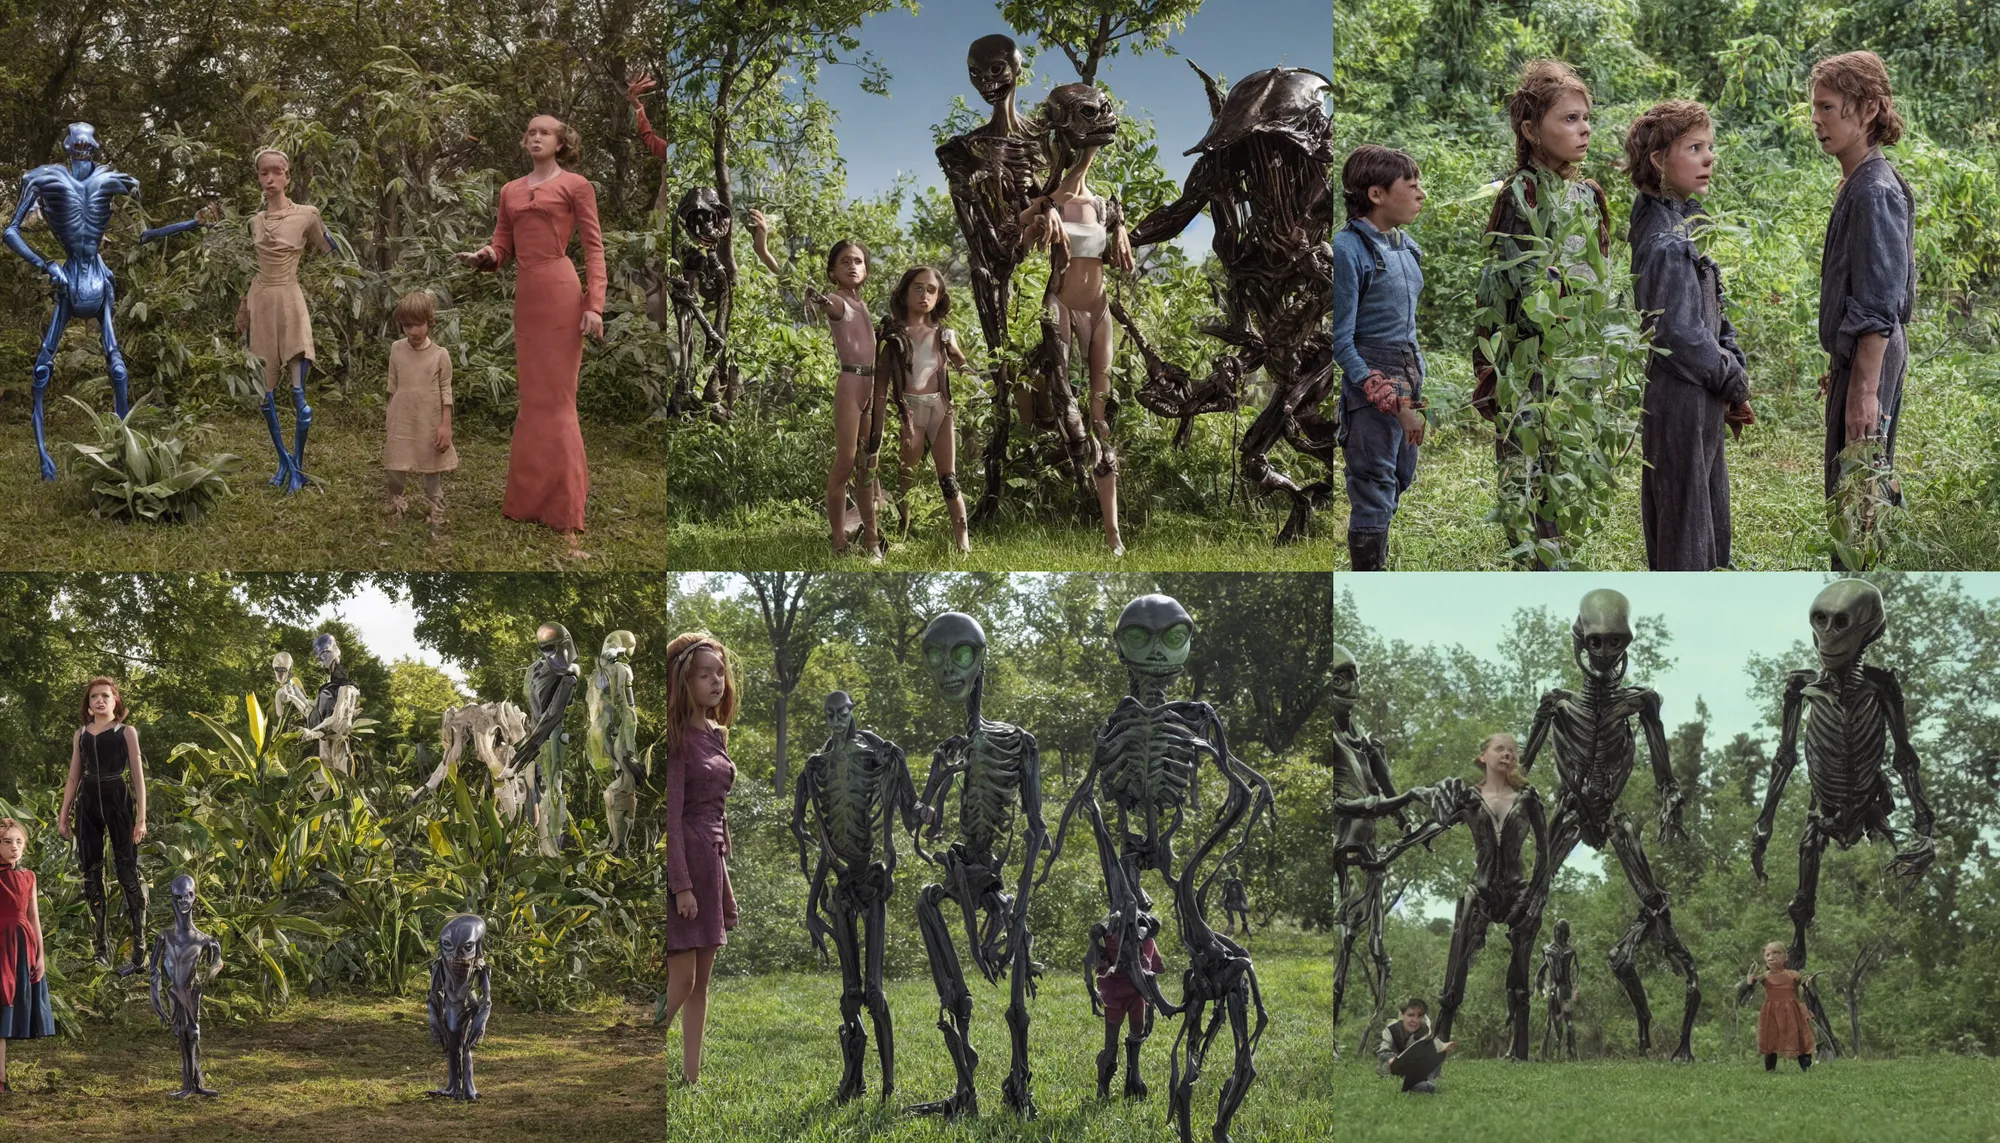 Prompt: sharp, highly detailed, 435456k film, 1612800mm film still from a sci fi blockbuster color movie made in 2019, set in 1860, of a girl and a boy standing soccer with an humanoid alien creature, next to some alien plants, in a park on an alien planet, wearing 1860s era clothes, good lighting, good photography, ultra high definition, in focus